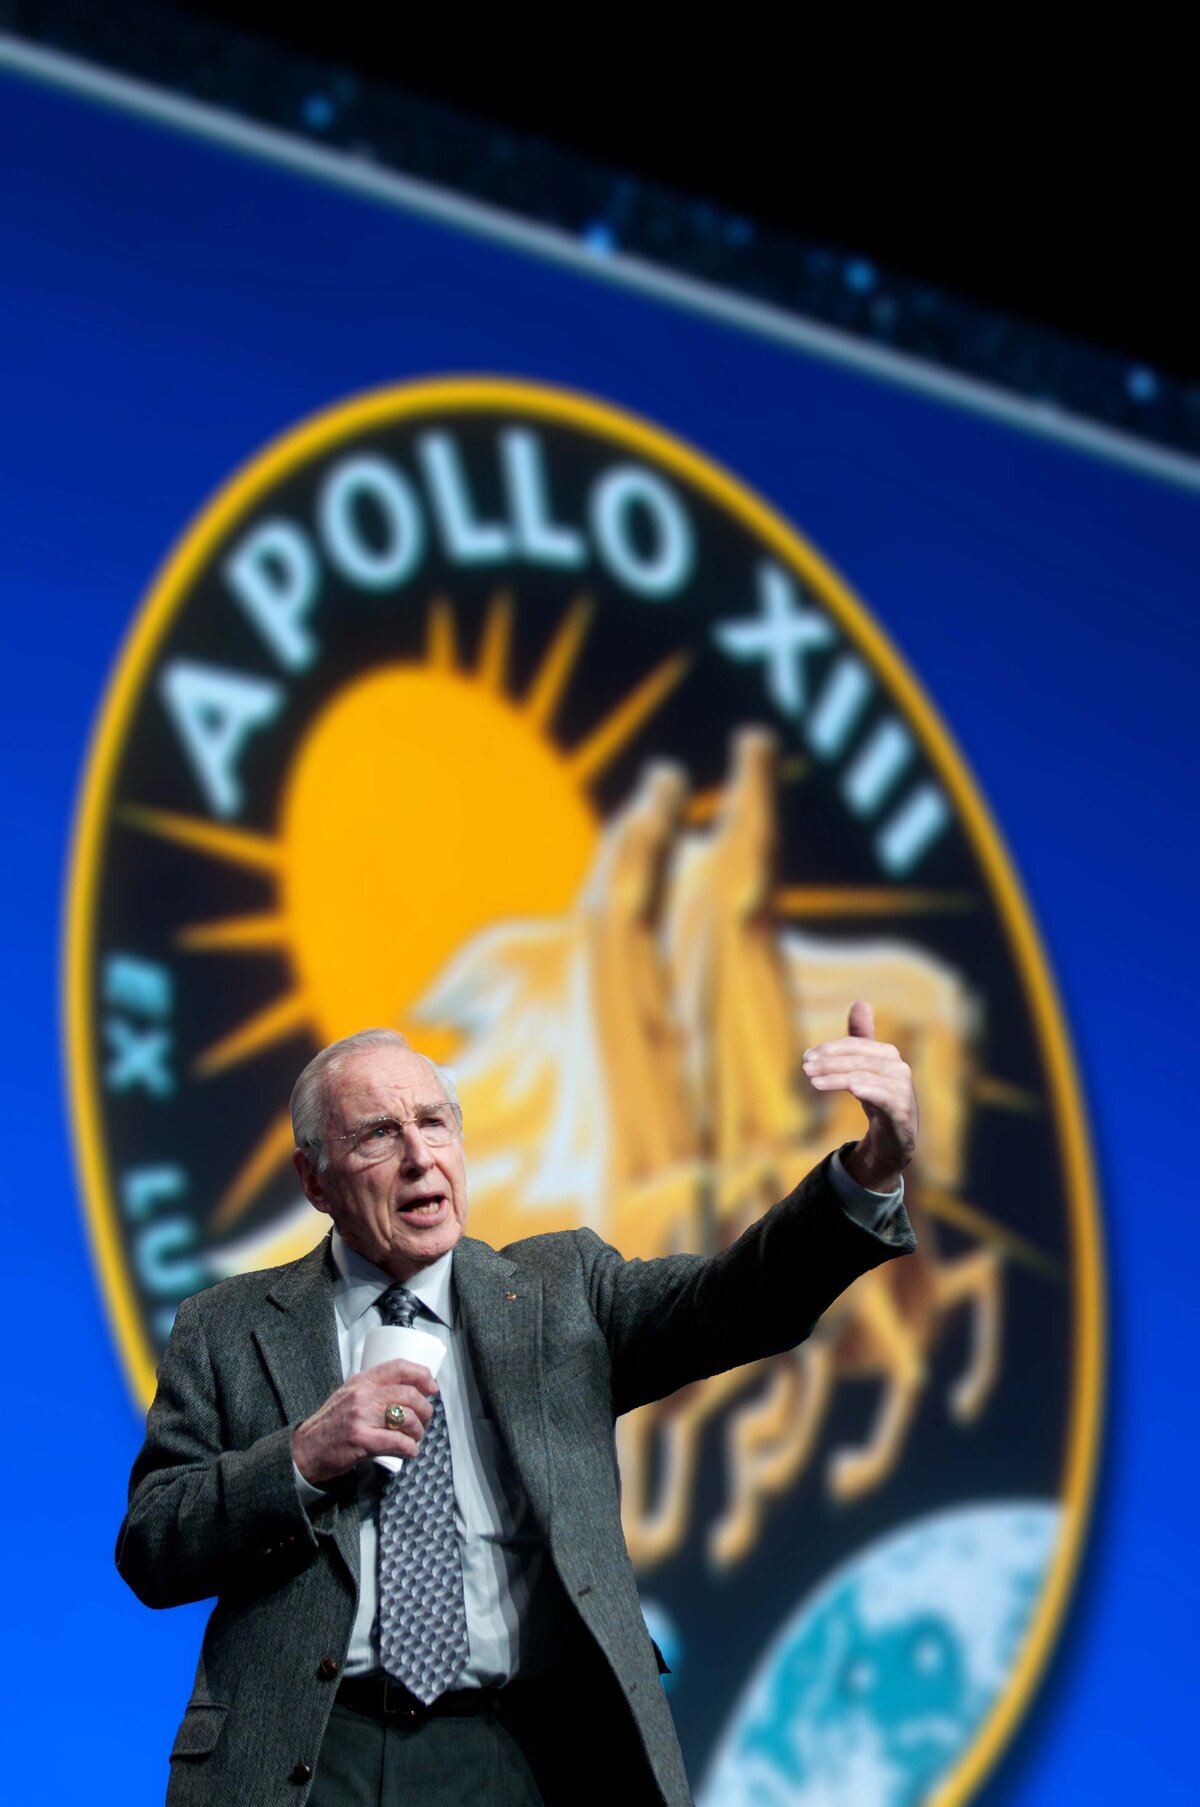 James Lovell speaking about overcoming adversity as he gestuyres with one arm in the air in front of him to simulate Apollo 13